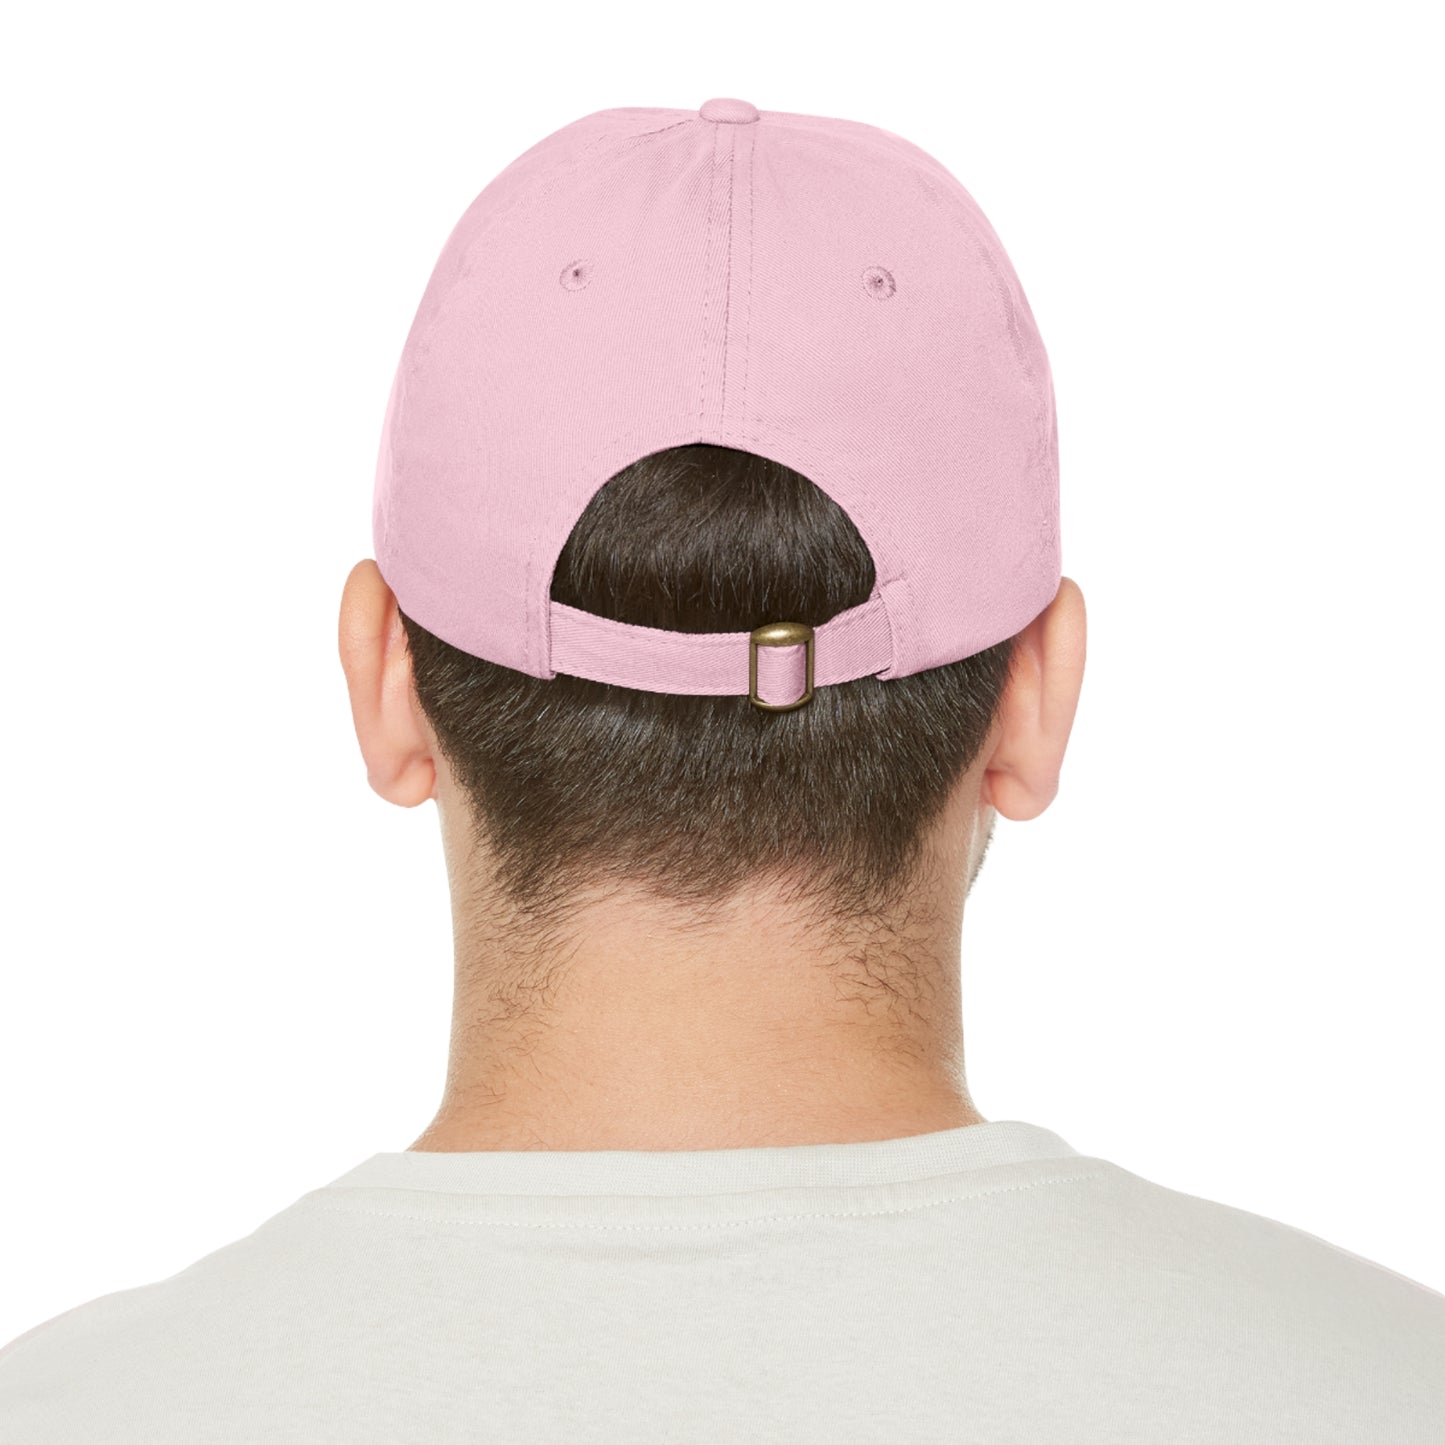 I Am Kenough - Dad Hat with Leather Patch (Rectangle)